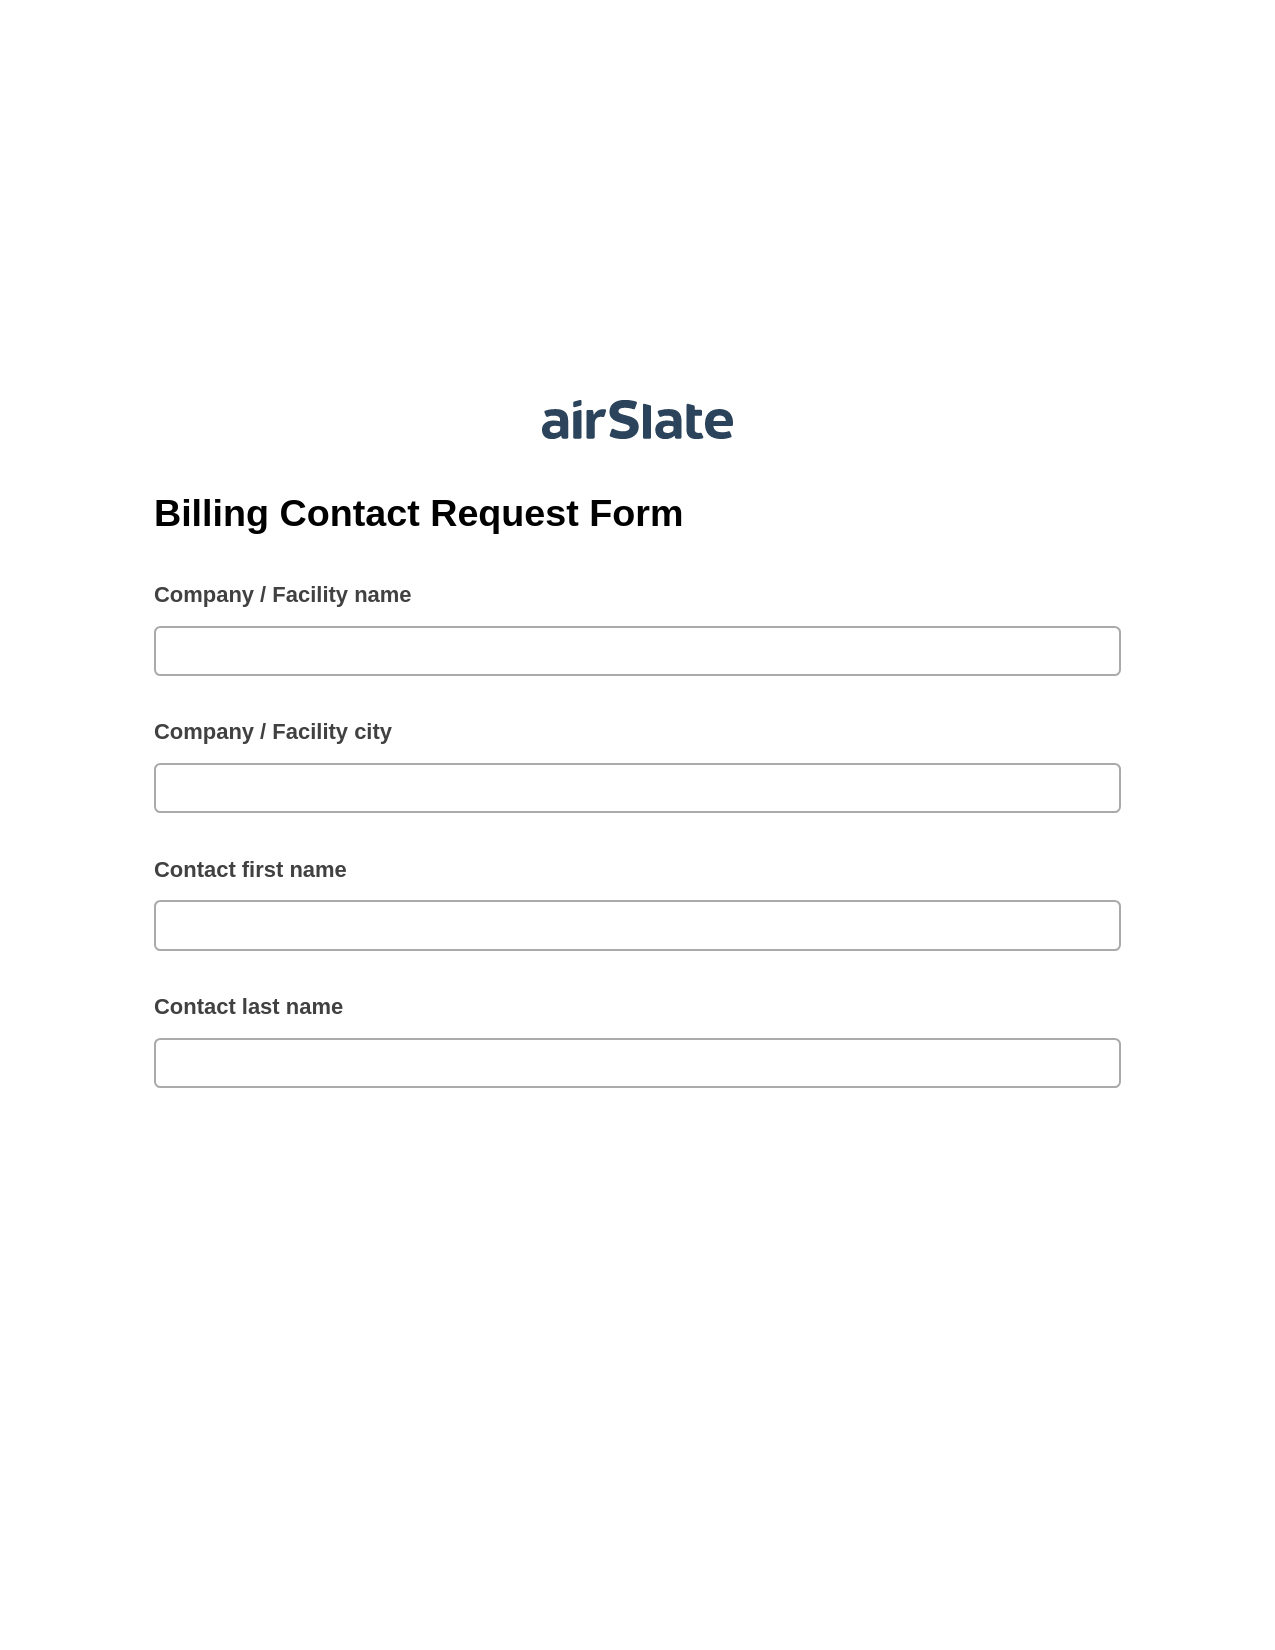 Multirole Billing Contact Request Form Pre-fill Dropdowns from CSV File Bot, Roles Reminder Bot, Post-finish Document Bot